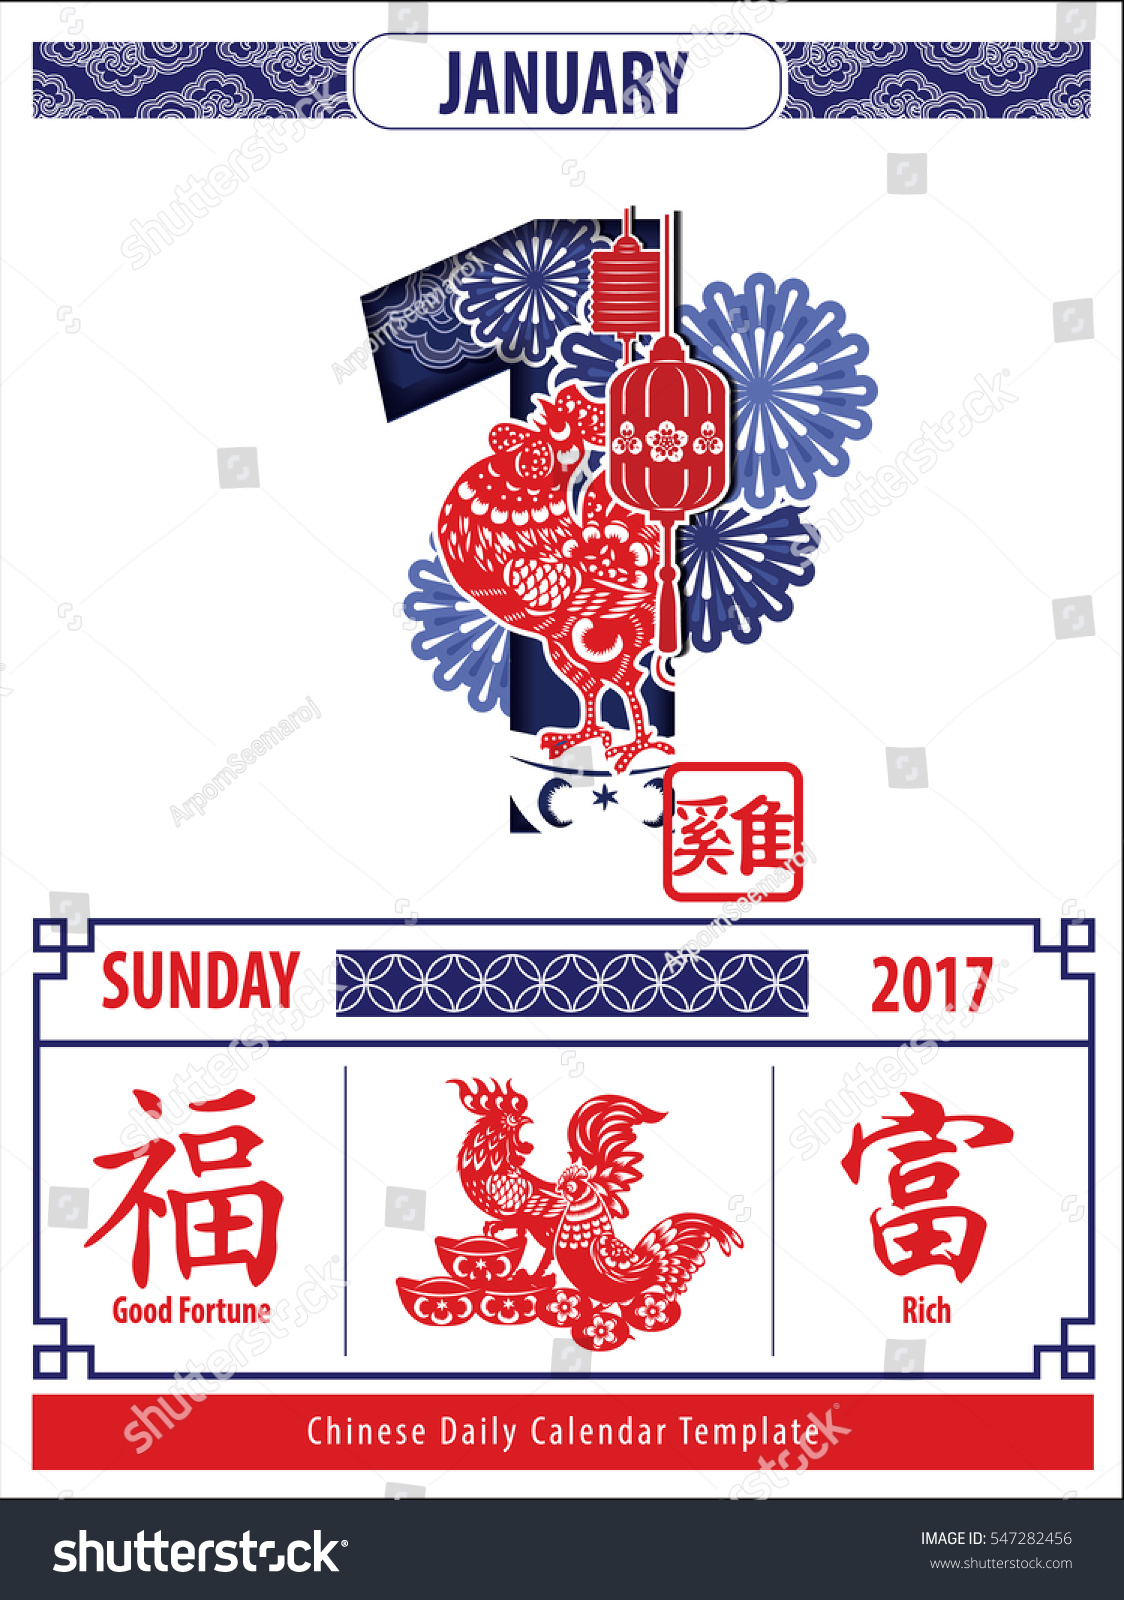 Vintage Chinese Calendar Template Rooster Chinese Stock Vector (Royalty